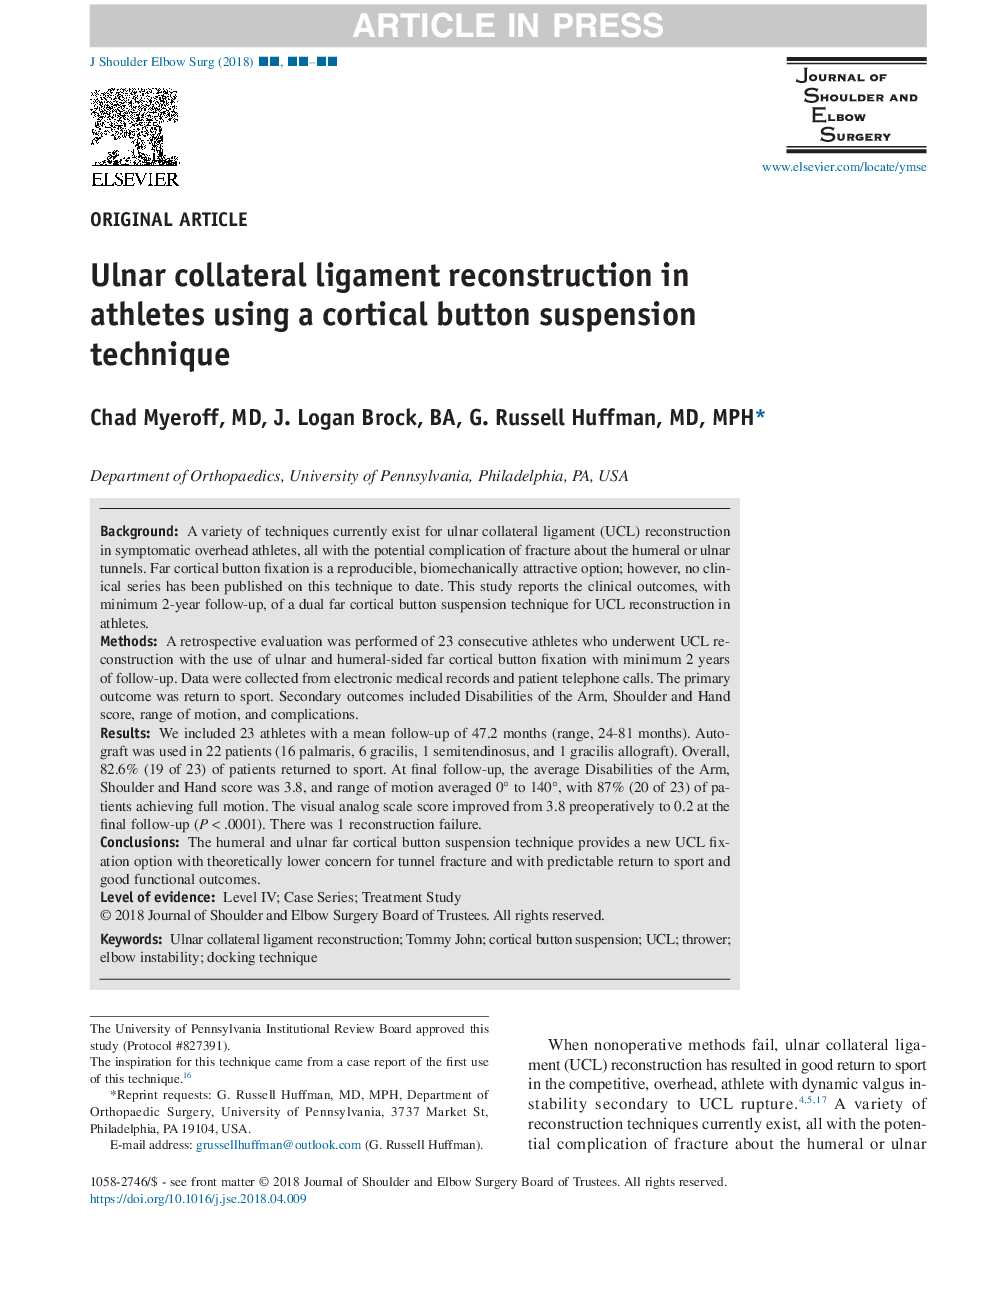 Ulnar collateral ligament reconstruction in athletes using a cortical button suspension technique